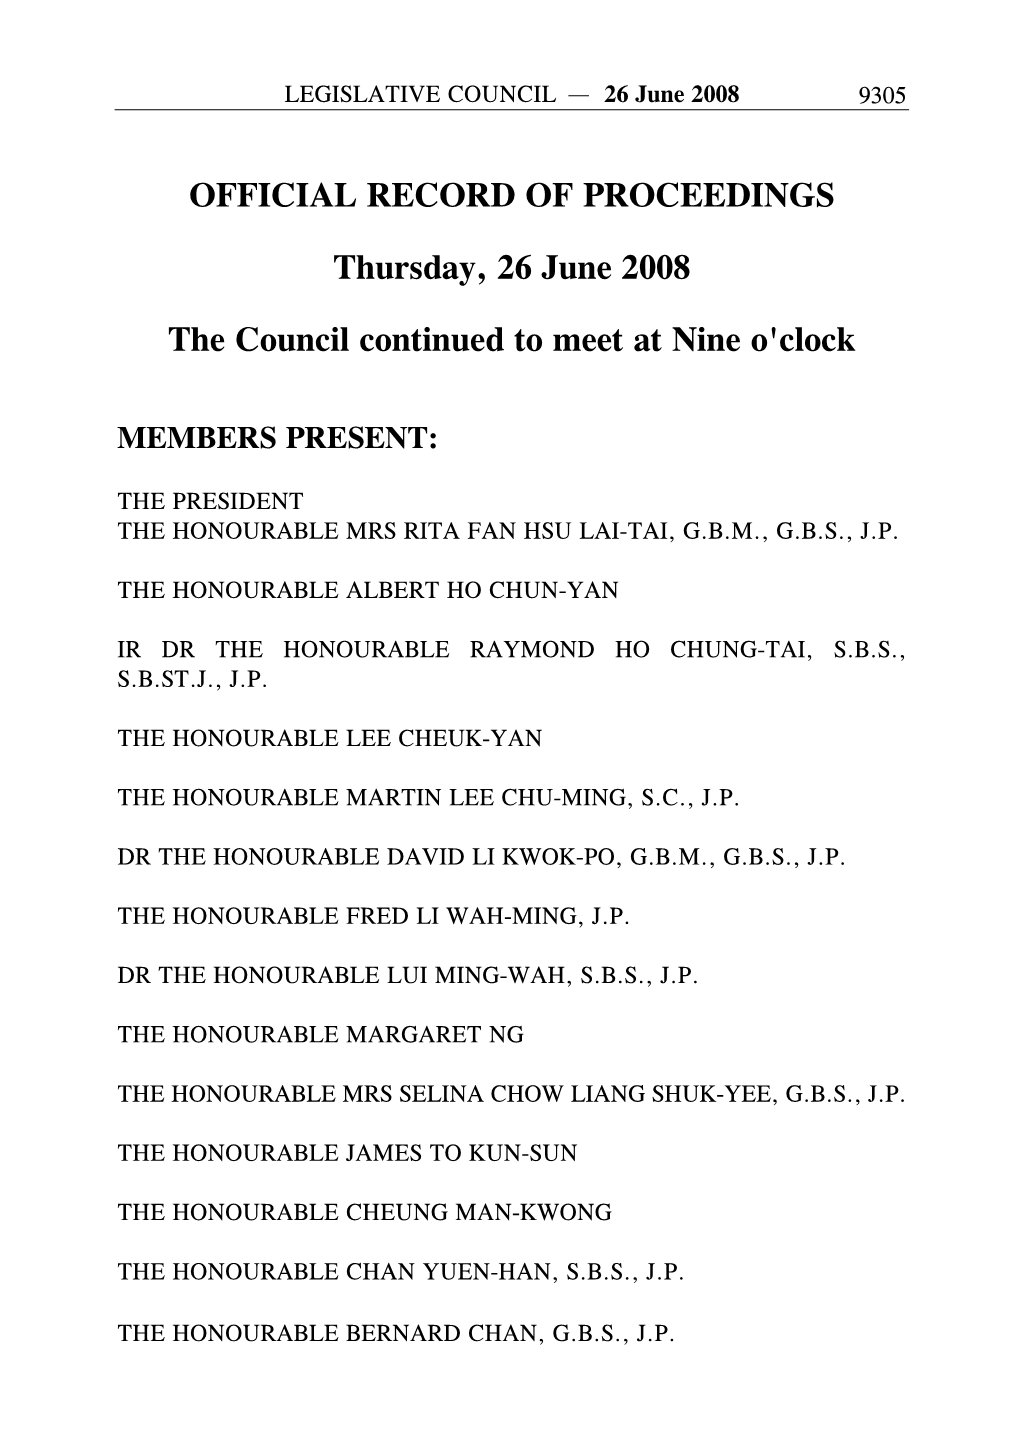 OFFICIAL RECORD of PROCEEDINGS Thursday, 26 June